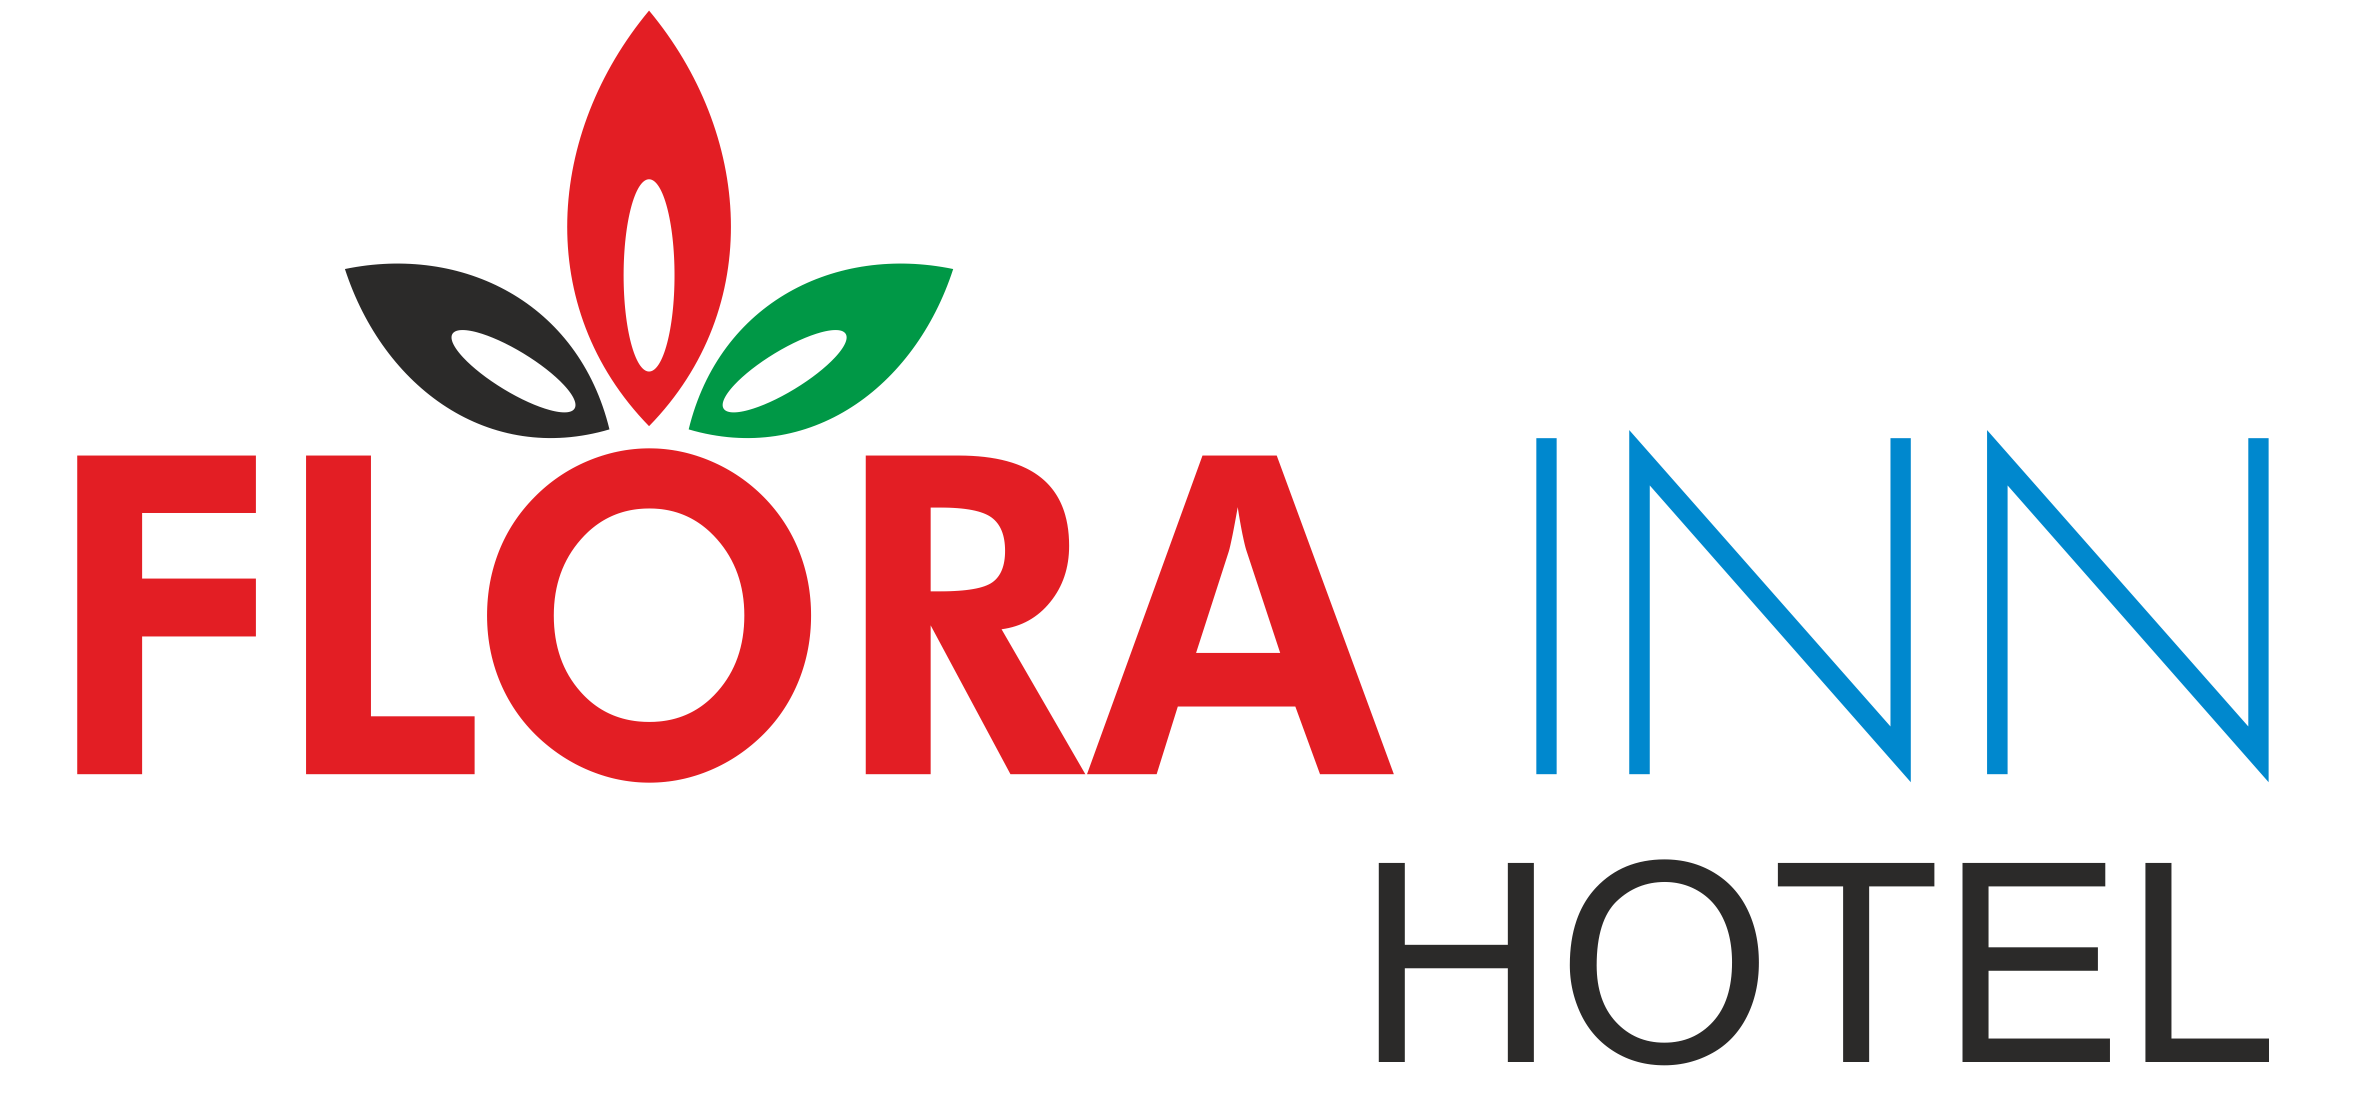 Best-Hotels-to-Stay-in-Nagpur-logo